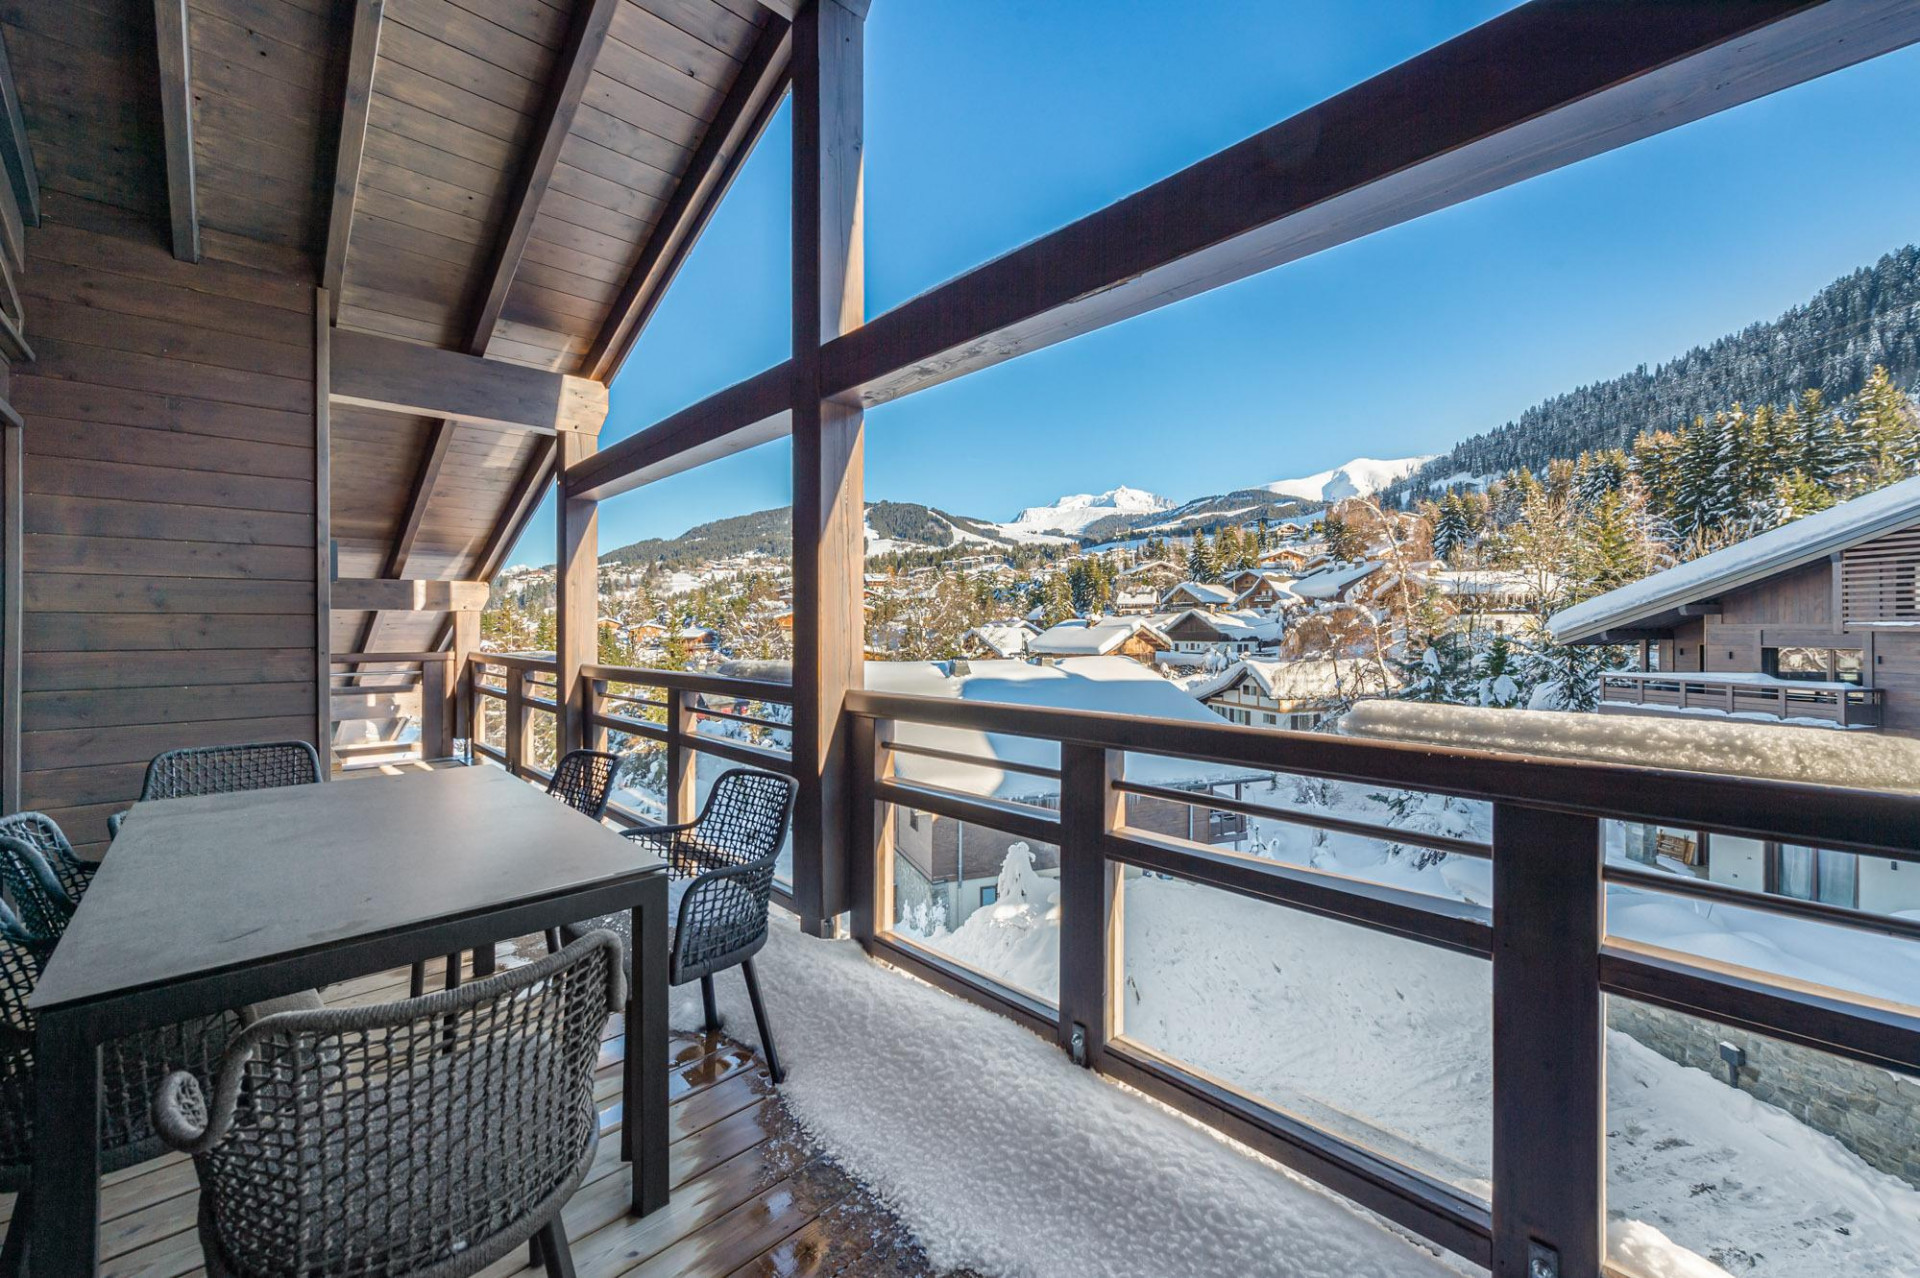 megeve-location-appartement-luxe-calion